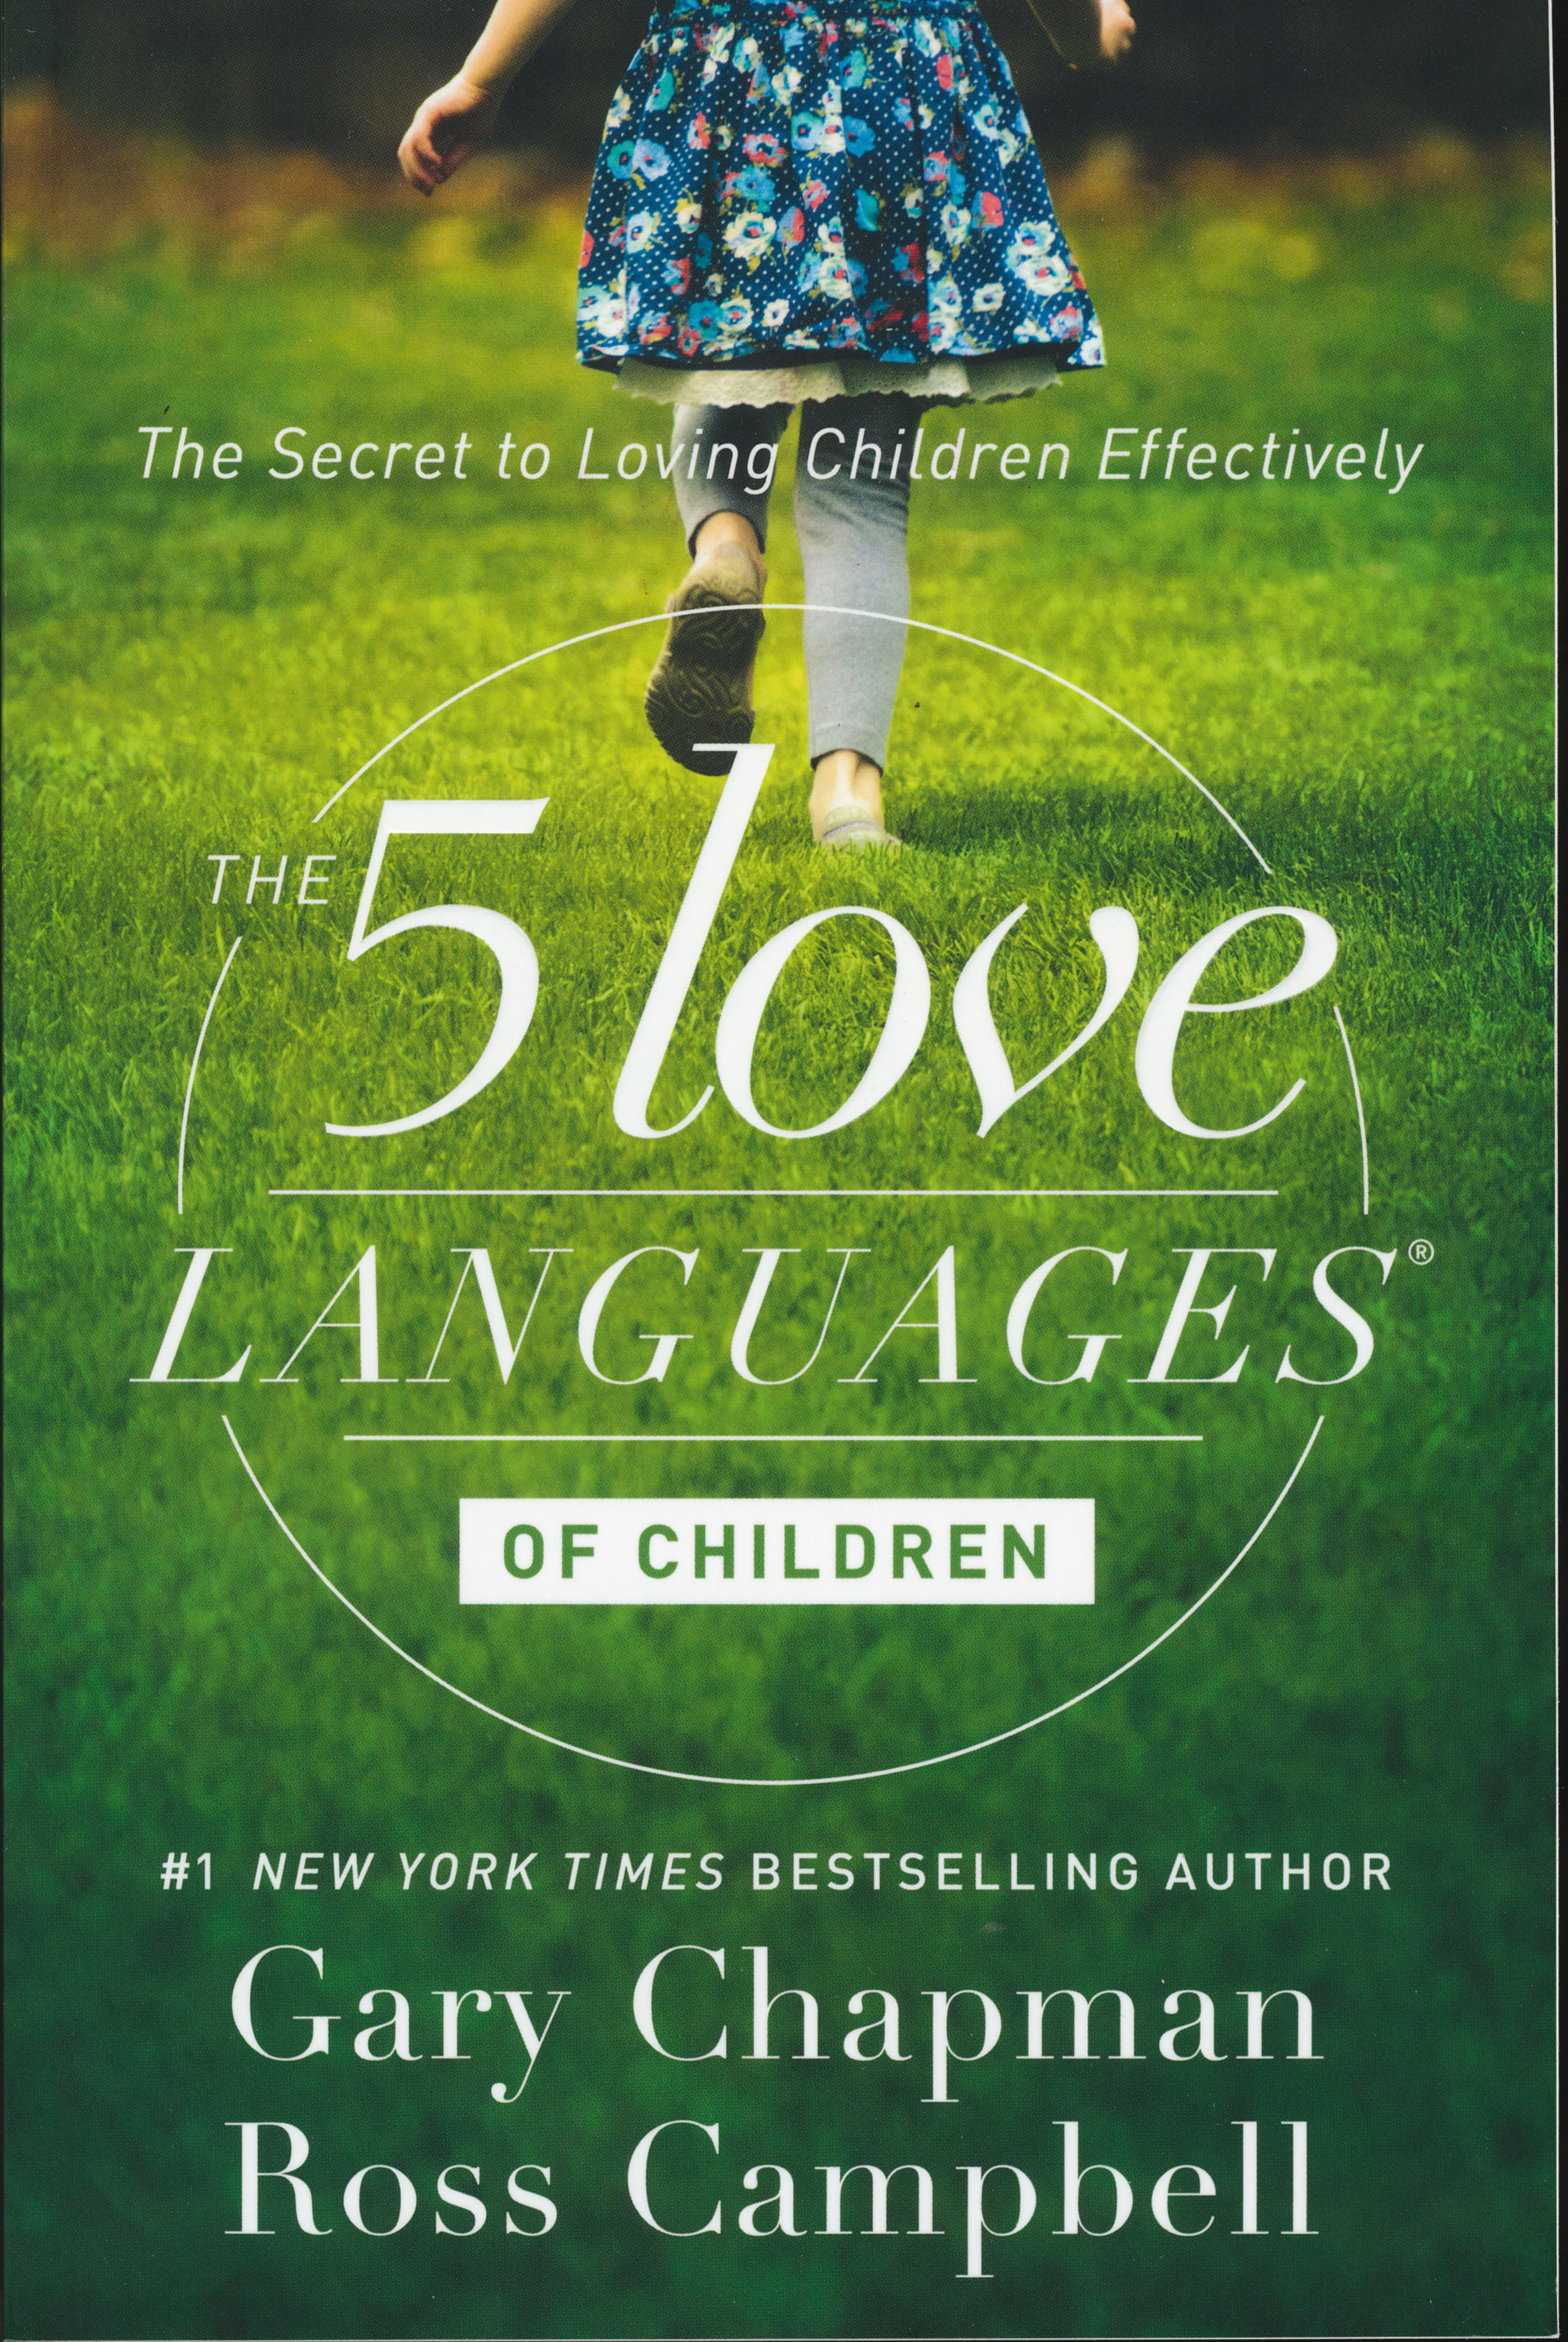 The 5 Love Languages of Children by Gary Chapman 108-9780802412850